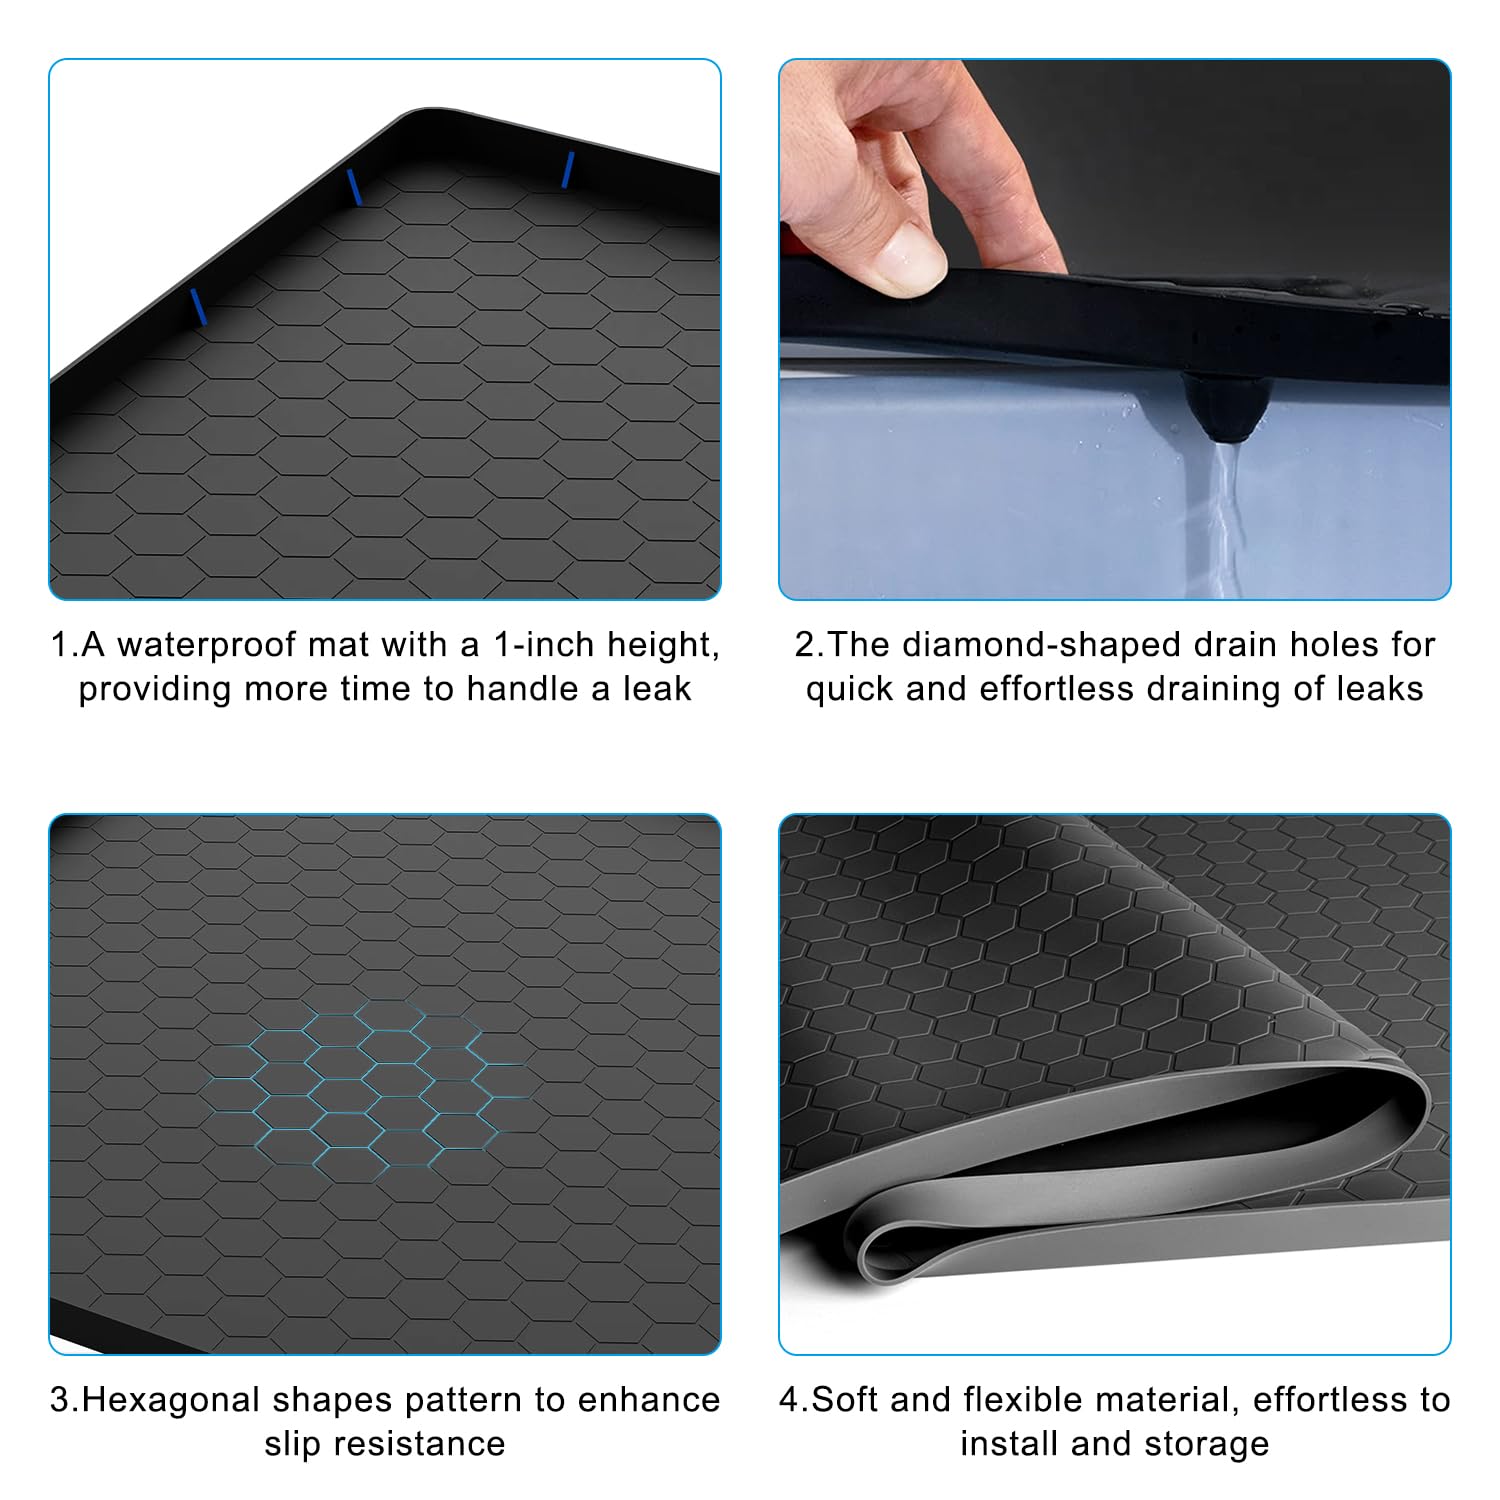 Under Sink Mats for Kitchen Waterproof - 34" x 22" Extra Thick Silicone Mat Bottom of Kitchen Sink Mat with Drain Hole, Cabinet Protection Kit with Under Kitchen Sink Mats & Shelf Liner for Drawers